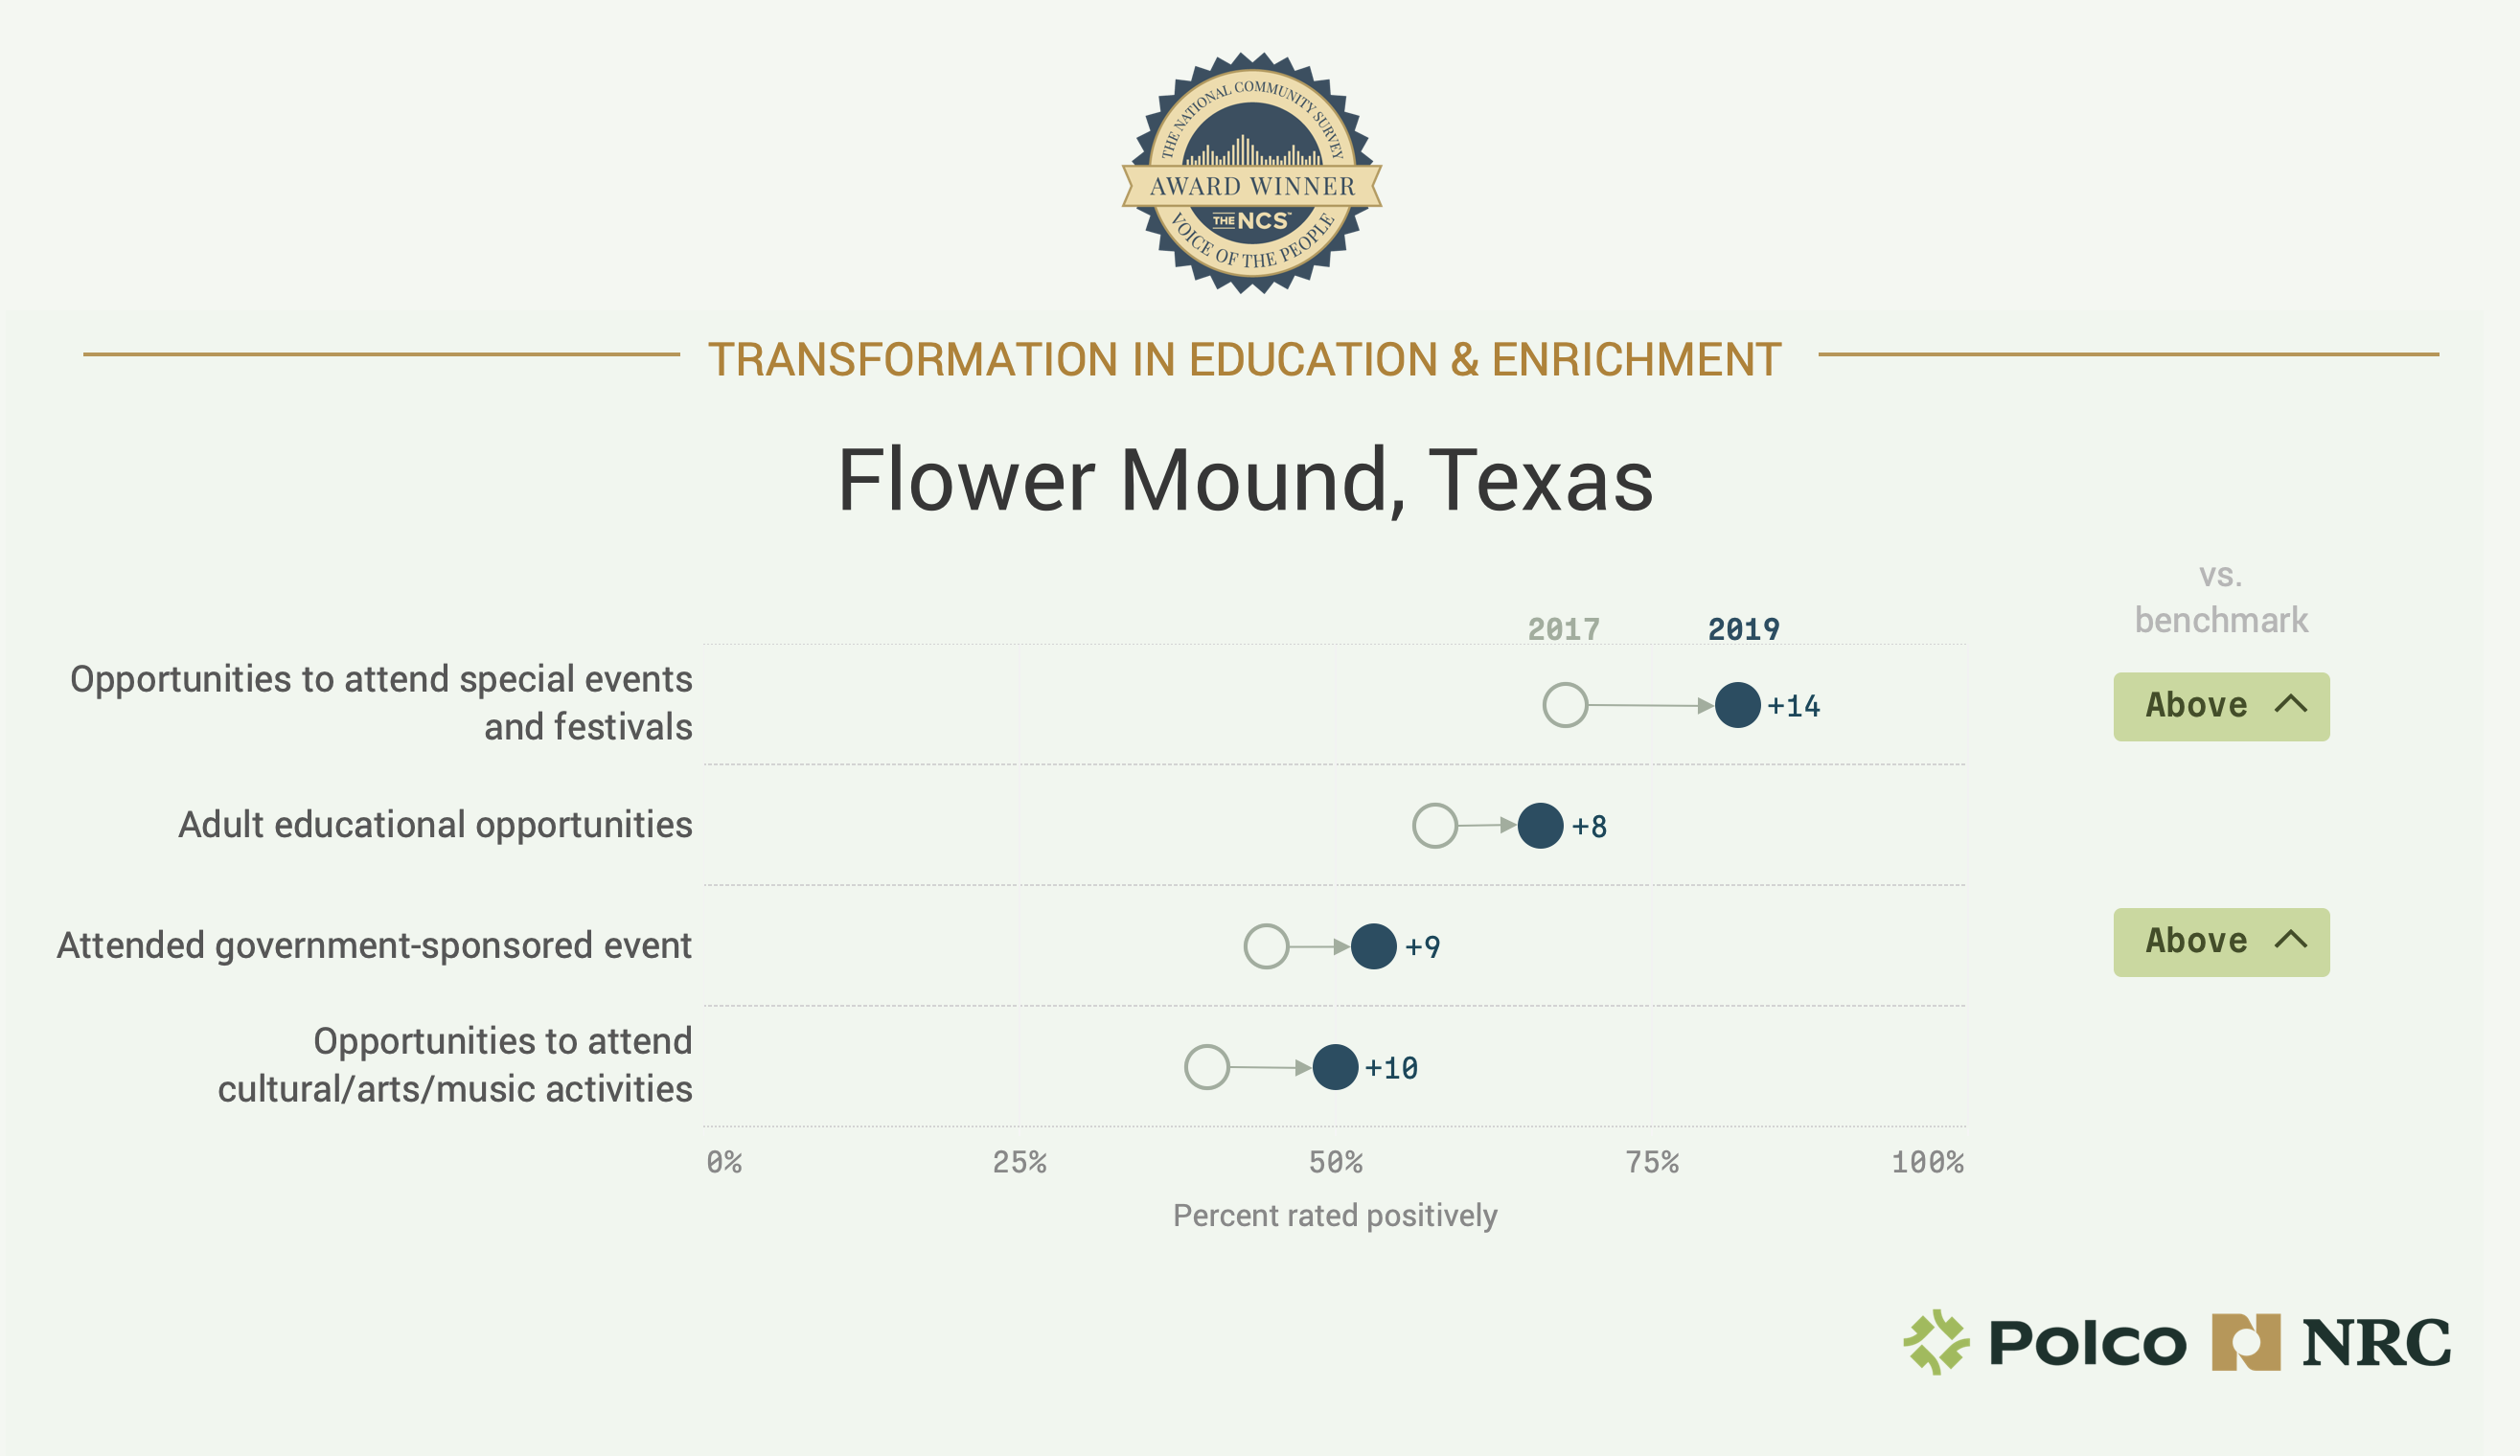 Chart showing Flower Mound, Texas' Transformation in Education and Enrichment